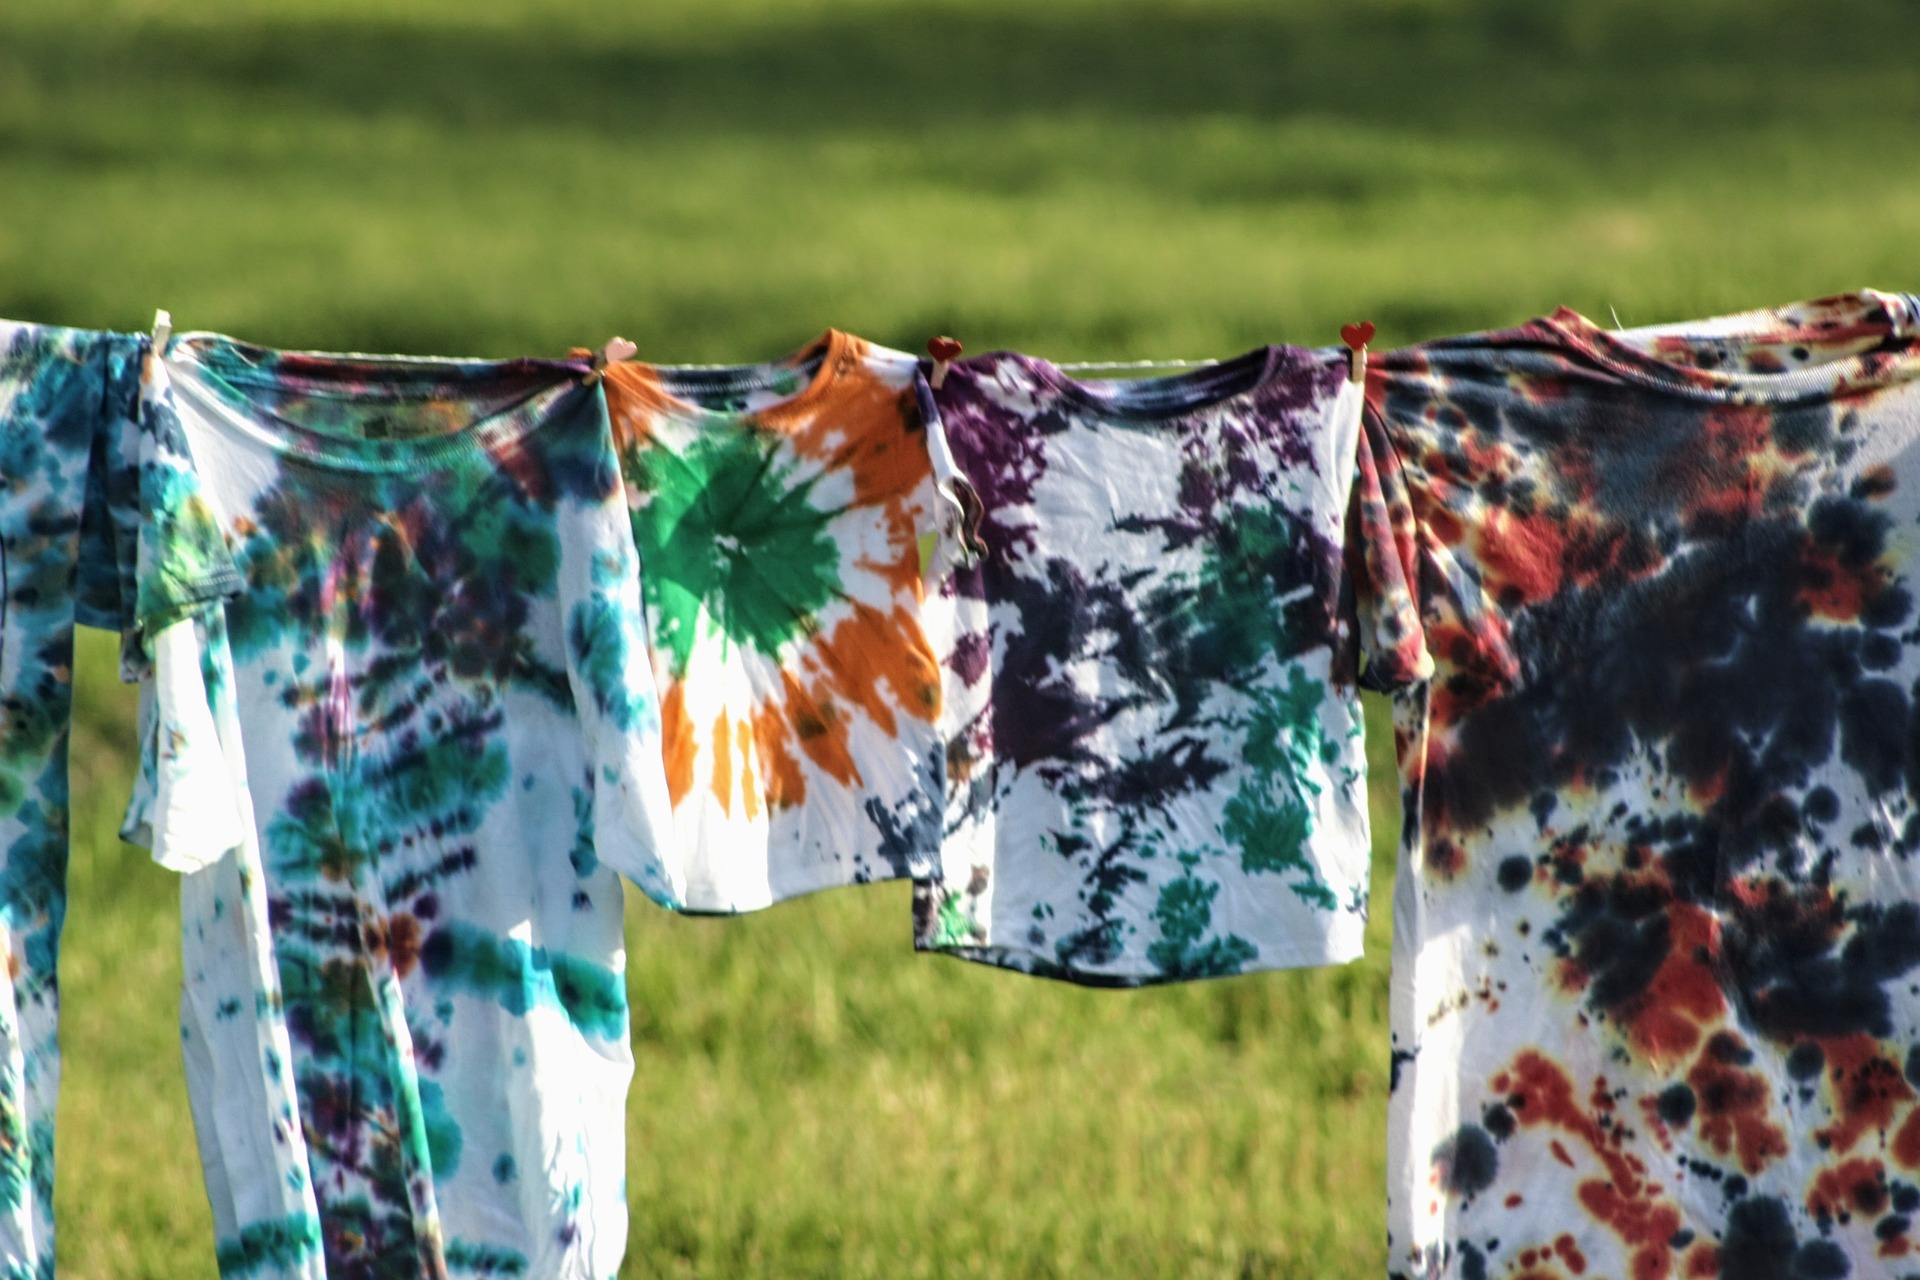 Bleach and Tie Dye Workshop for Everyone!